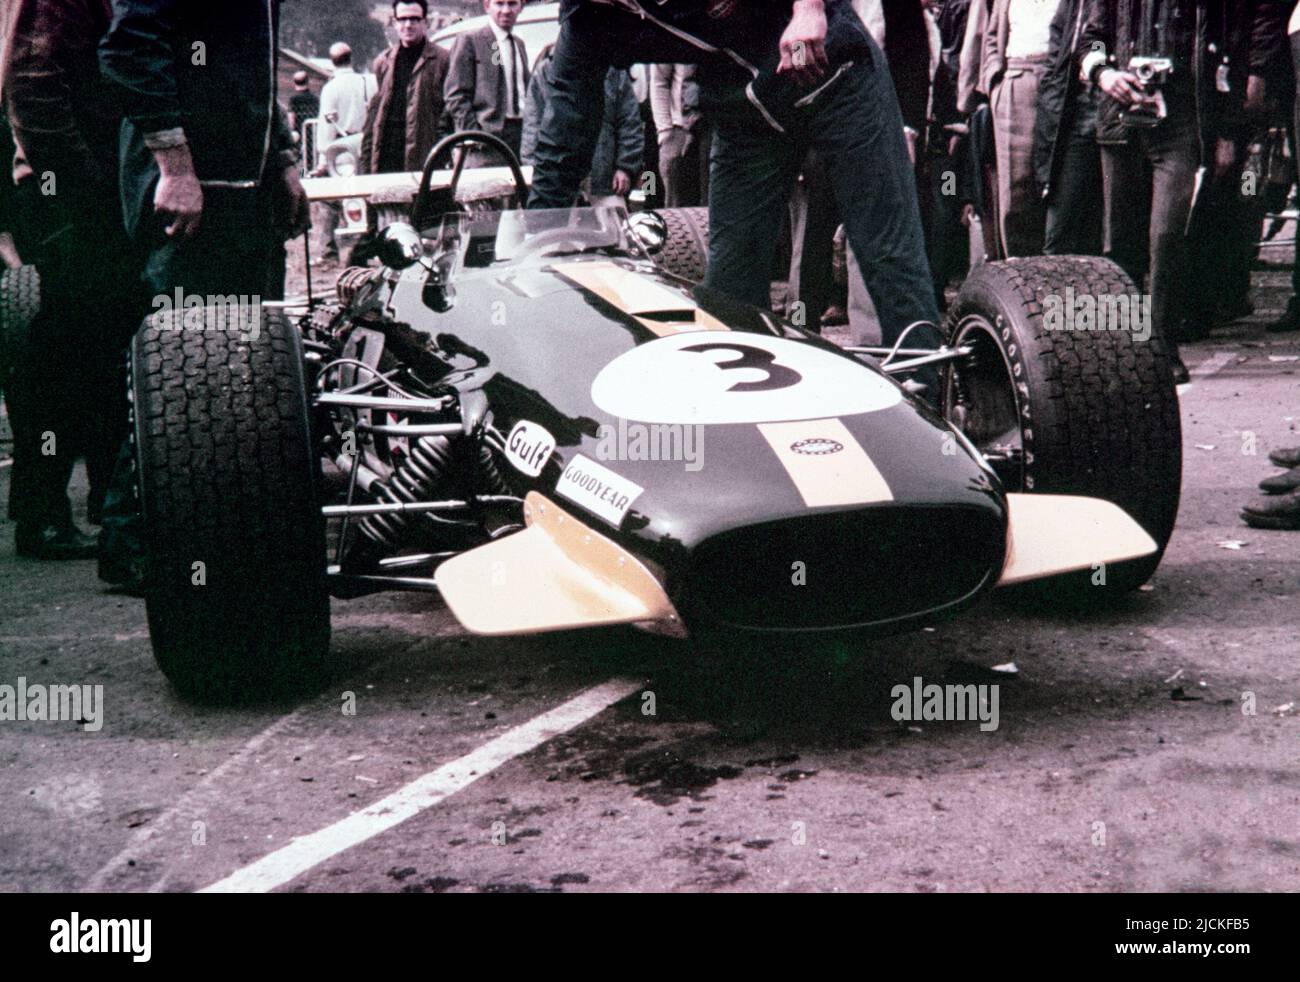 1968 British Formula 1 Grand Prix at Brands Hatch. The Brabham BT26 Repco, race number 3, to be driven by Jack Brabham. Stock Photo